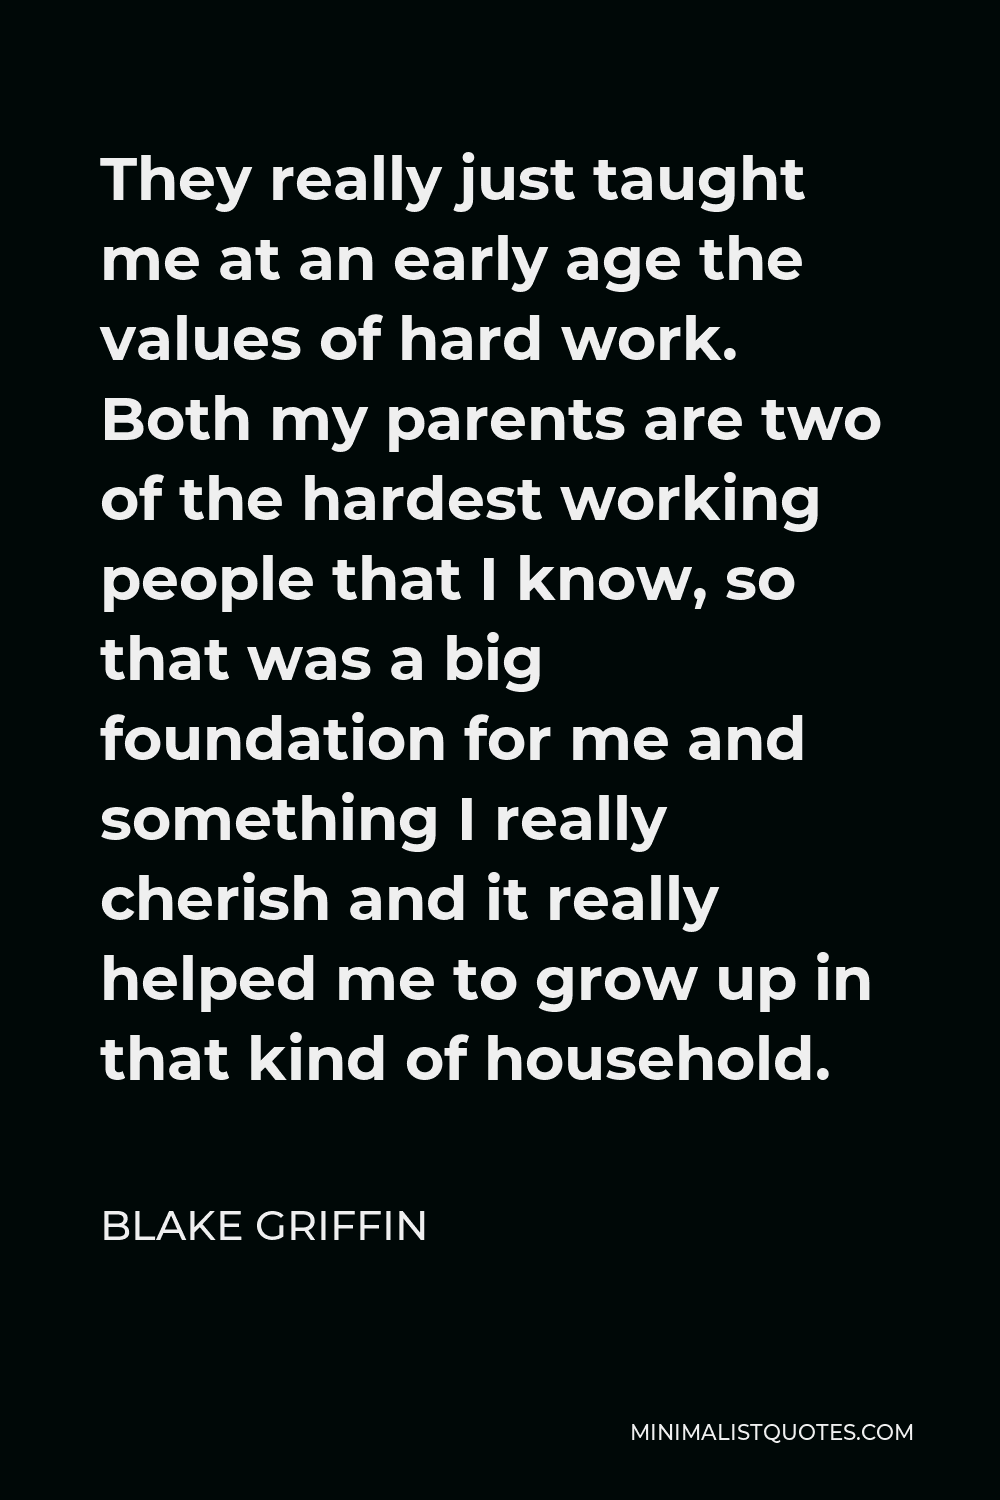 Blake Griffin Quote - They really just taught me at an early age the values of hard work. Both my parents are two of the hardest working people that I know, so that was a big foundation for me and something I really cherish and it really helped me to grow up in that kind of household.